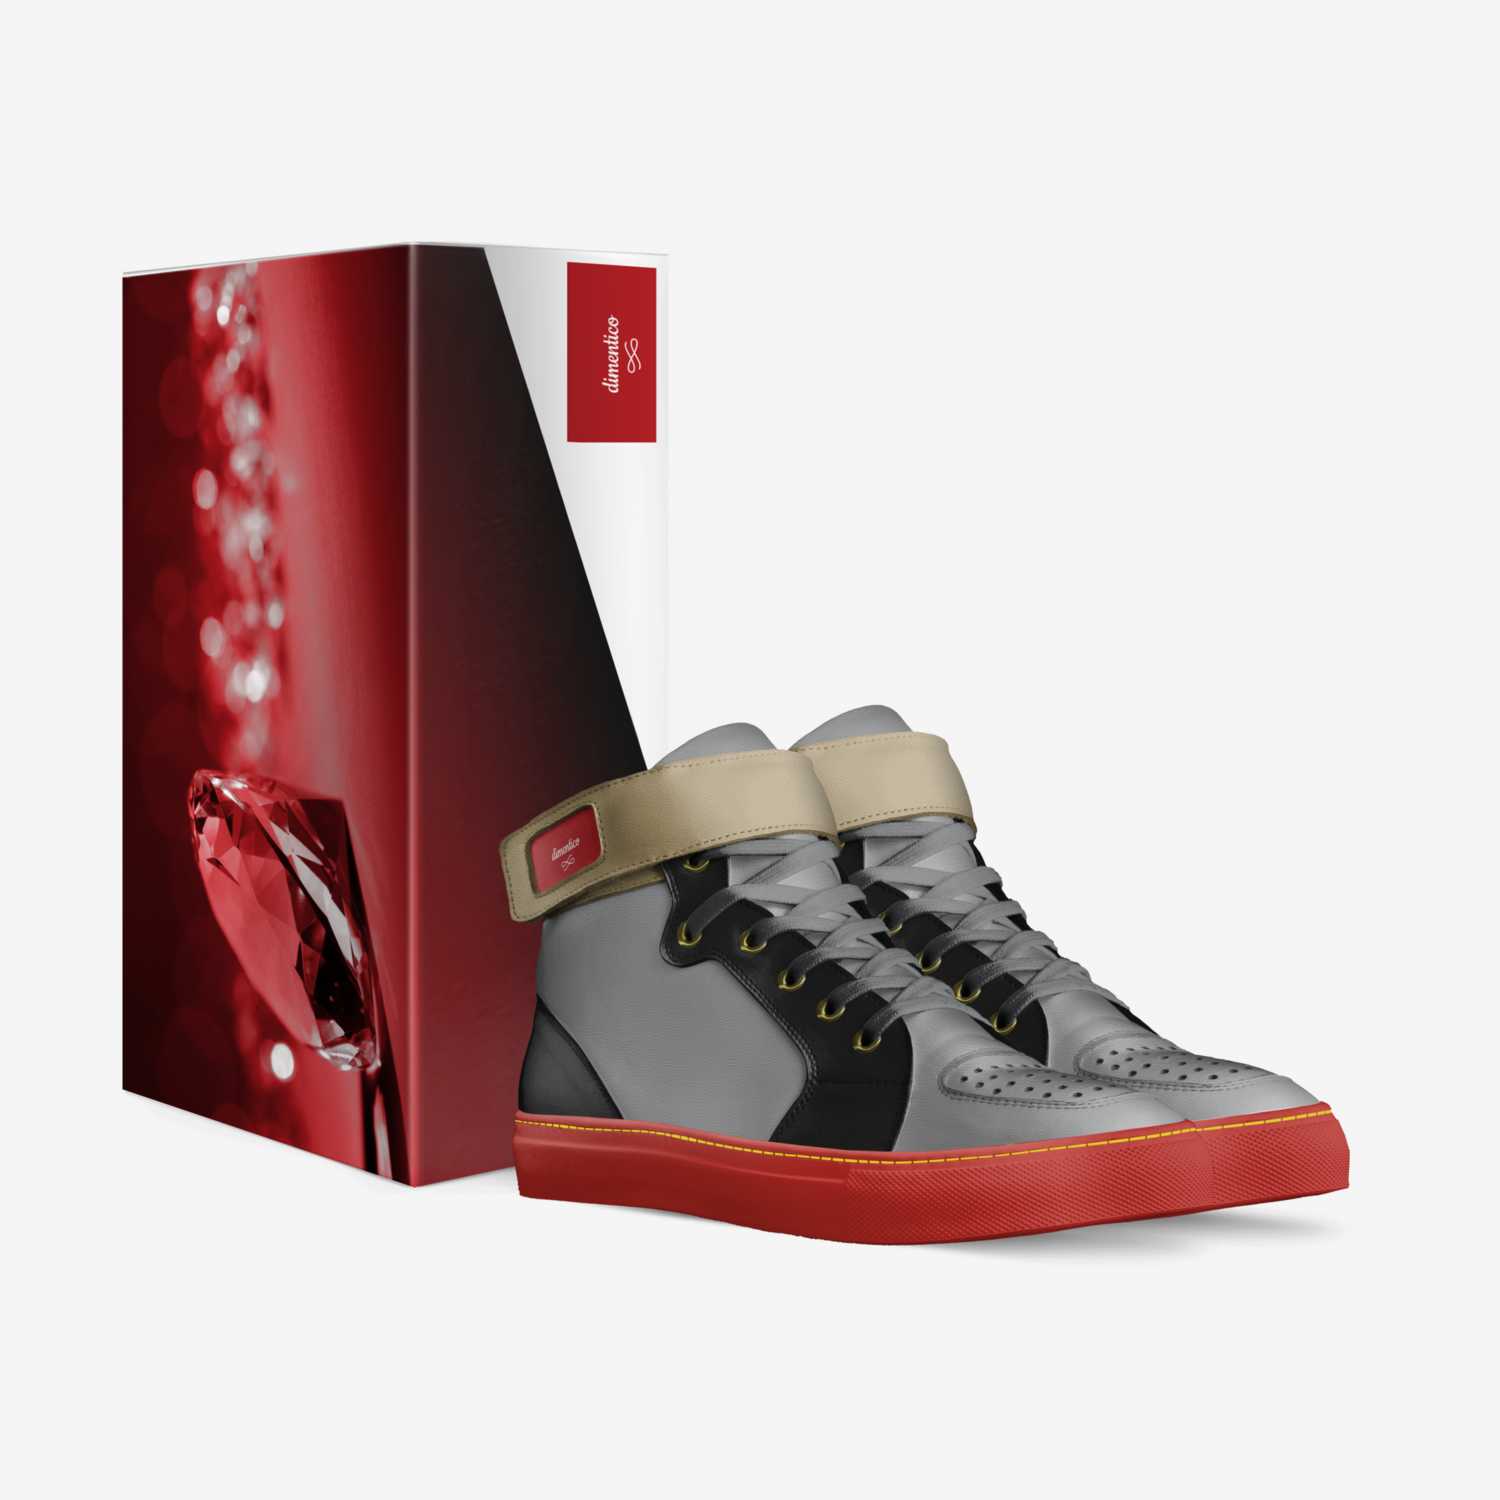 dimentico custom made in Italy shoes by Richie Arroyo | Box view